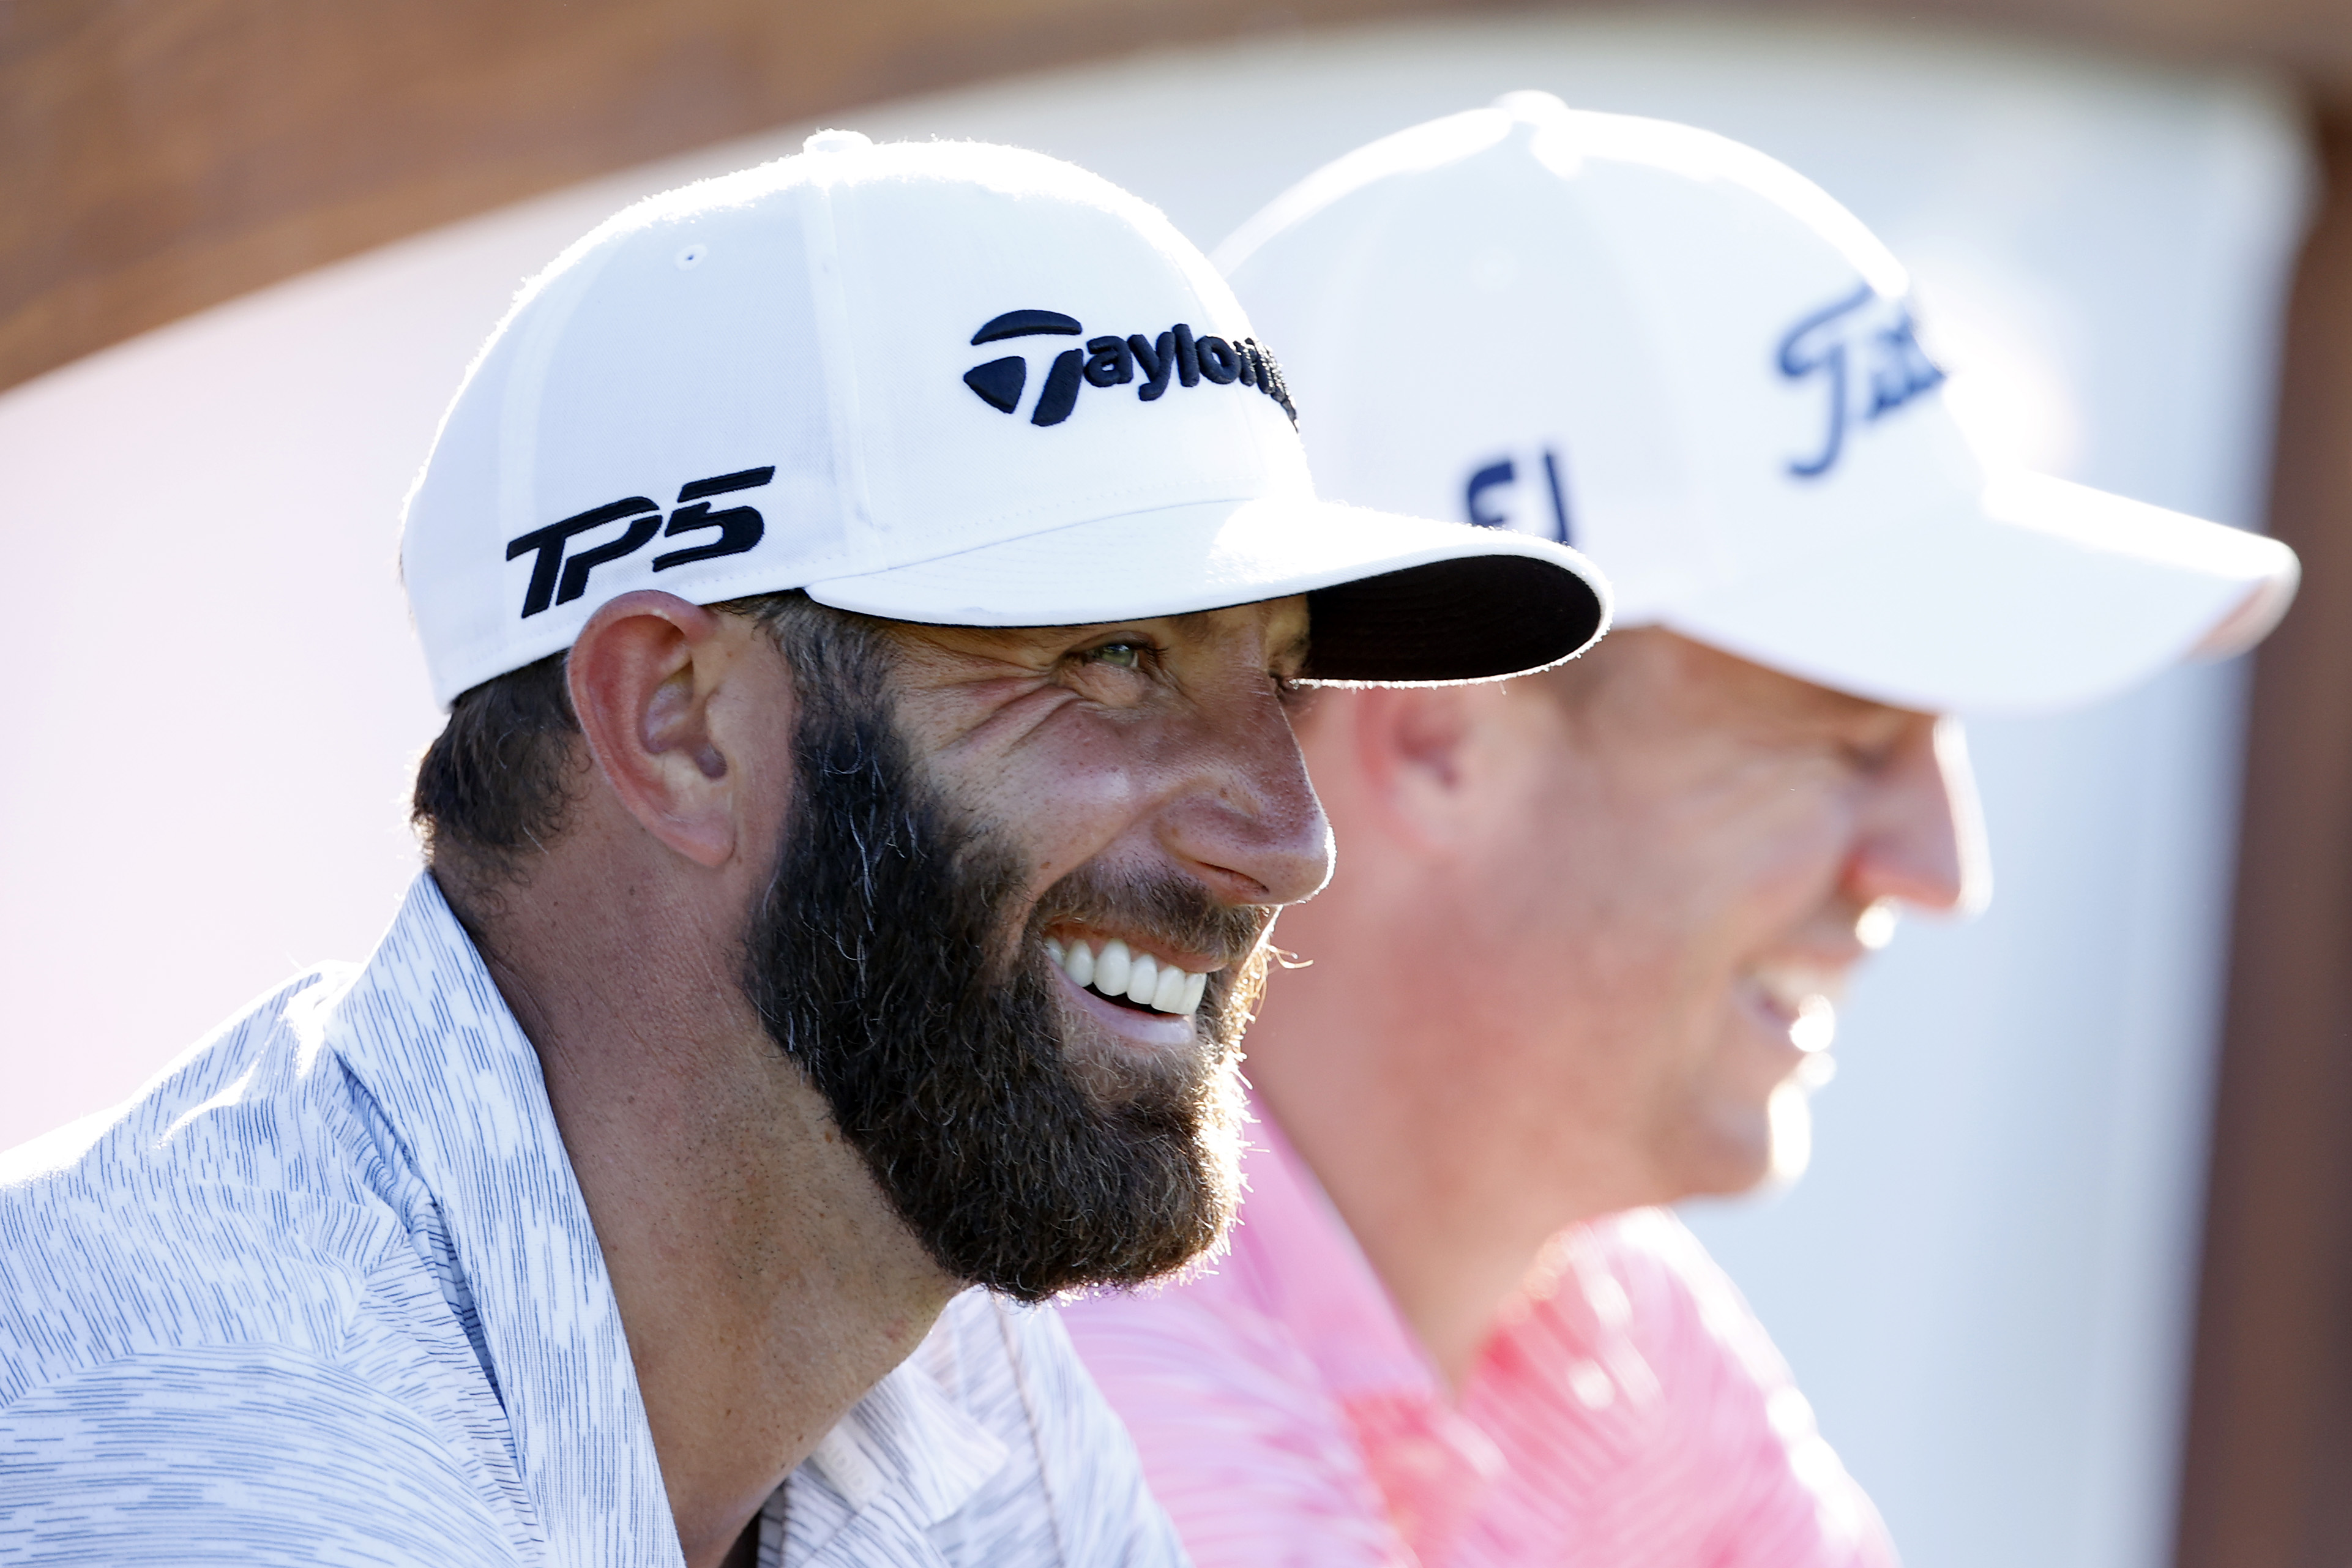 Dustin Johnson laughs as they wait on the 18th tee during the 2021 Sentry Tournament Of Champions